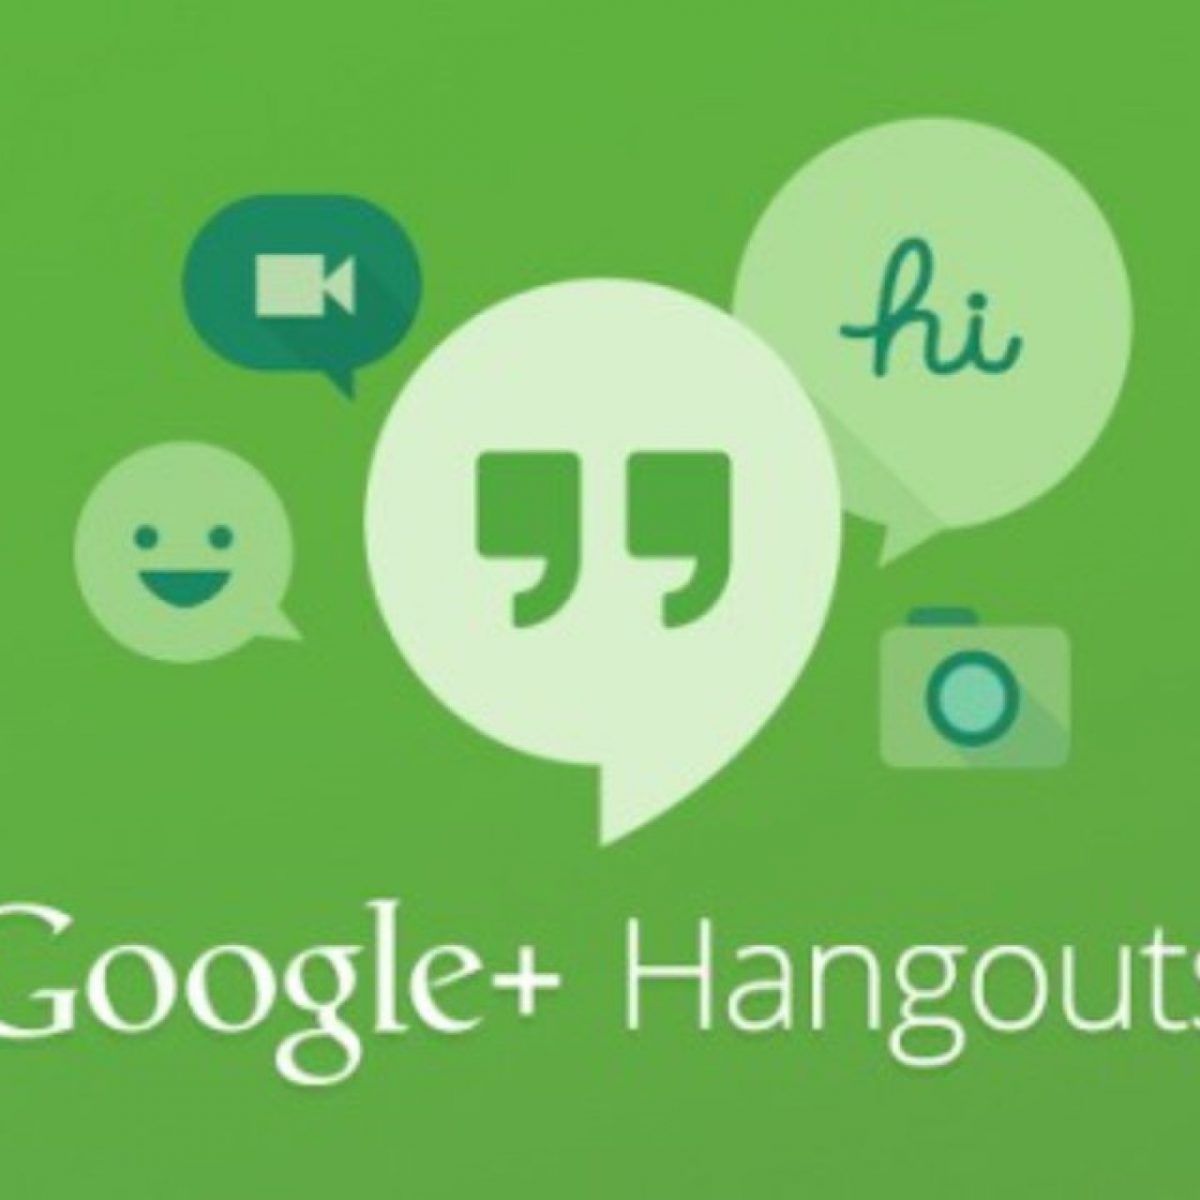 Google Hangouts For Windows 10 / Google Hangouts Chat Talk Video Calls Erweiterung Opera Add Ons / Try the latest version of hangouts 2019 for windows.